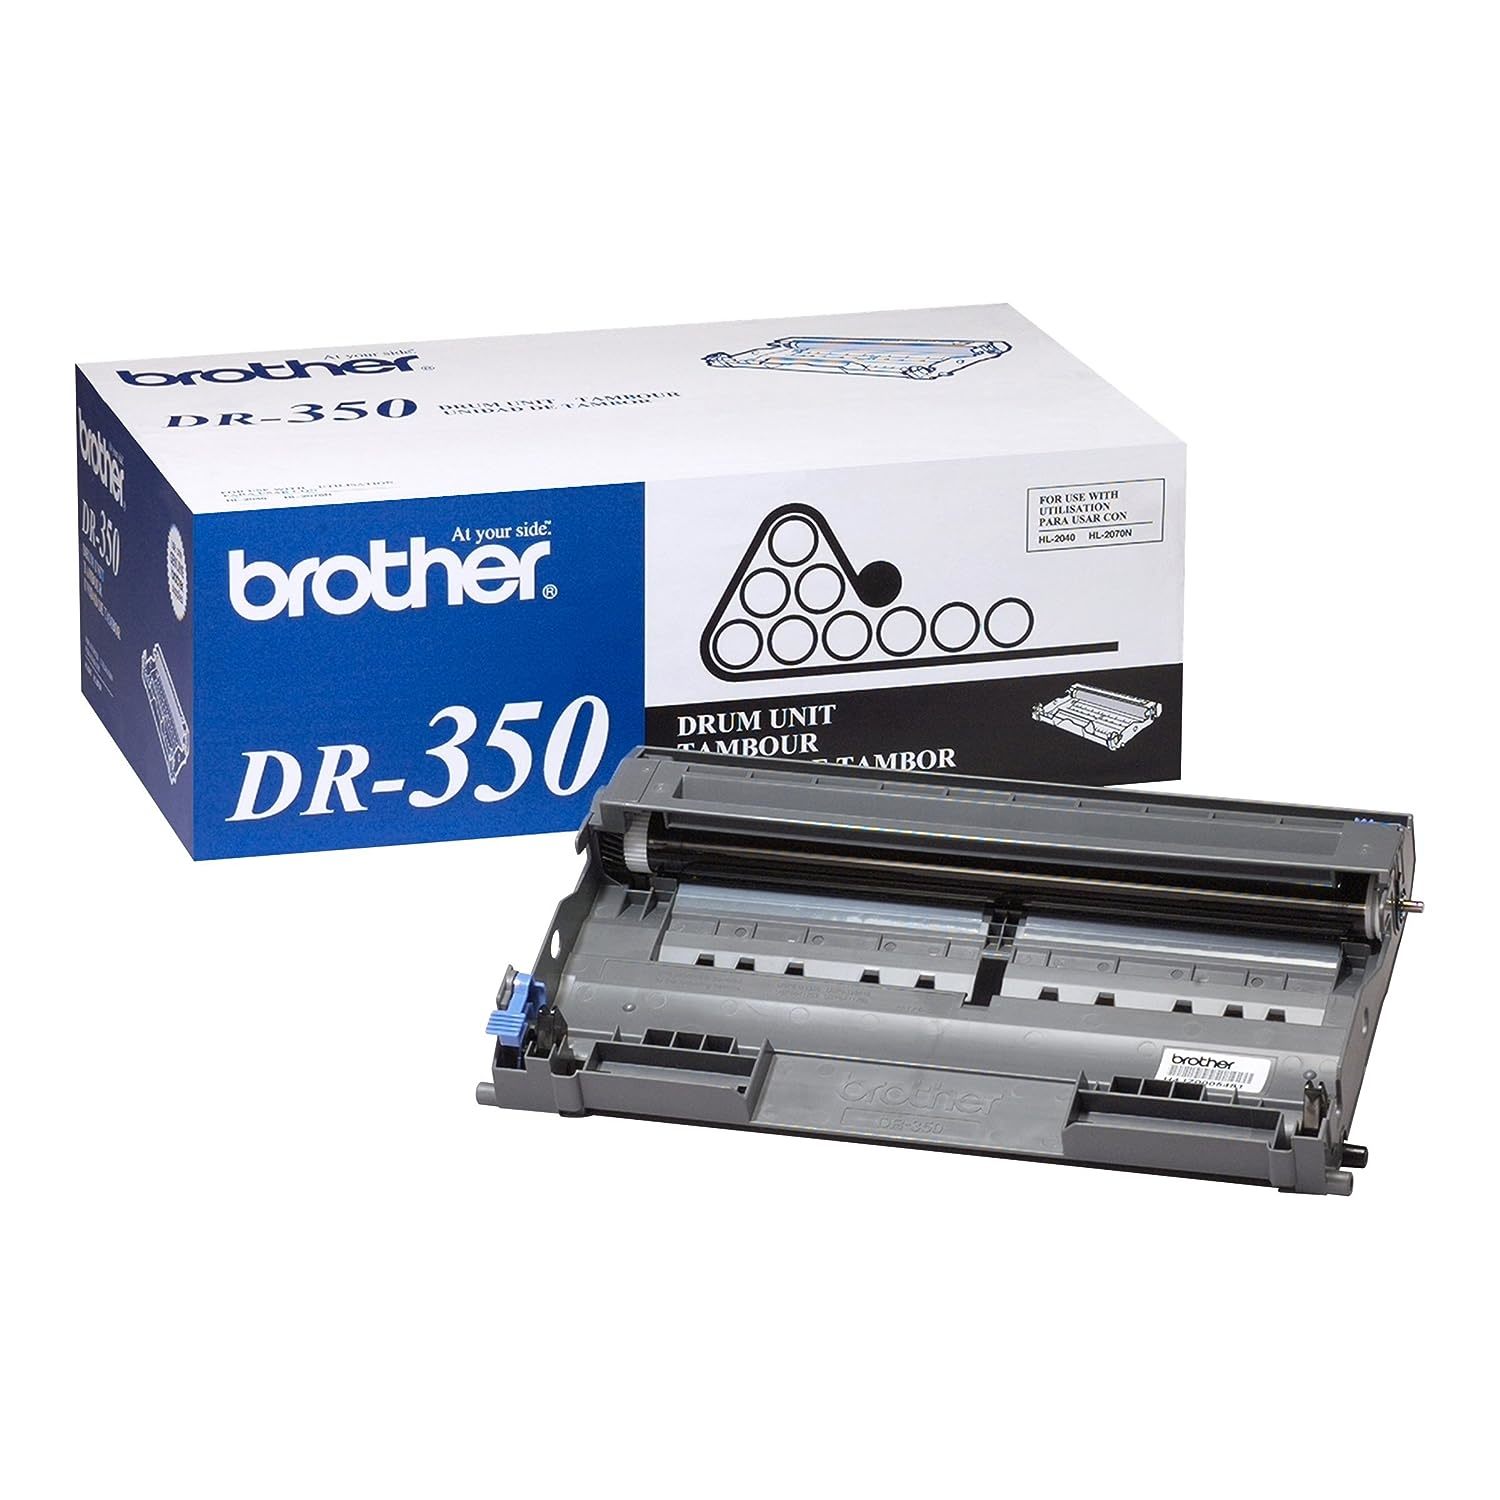 Primary image for Brother DR-350 DCP-7010 7020 7025 FAX-2820 2825 2920 HL-2030 2040 2070 IntelliFa